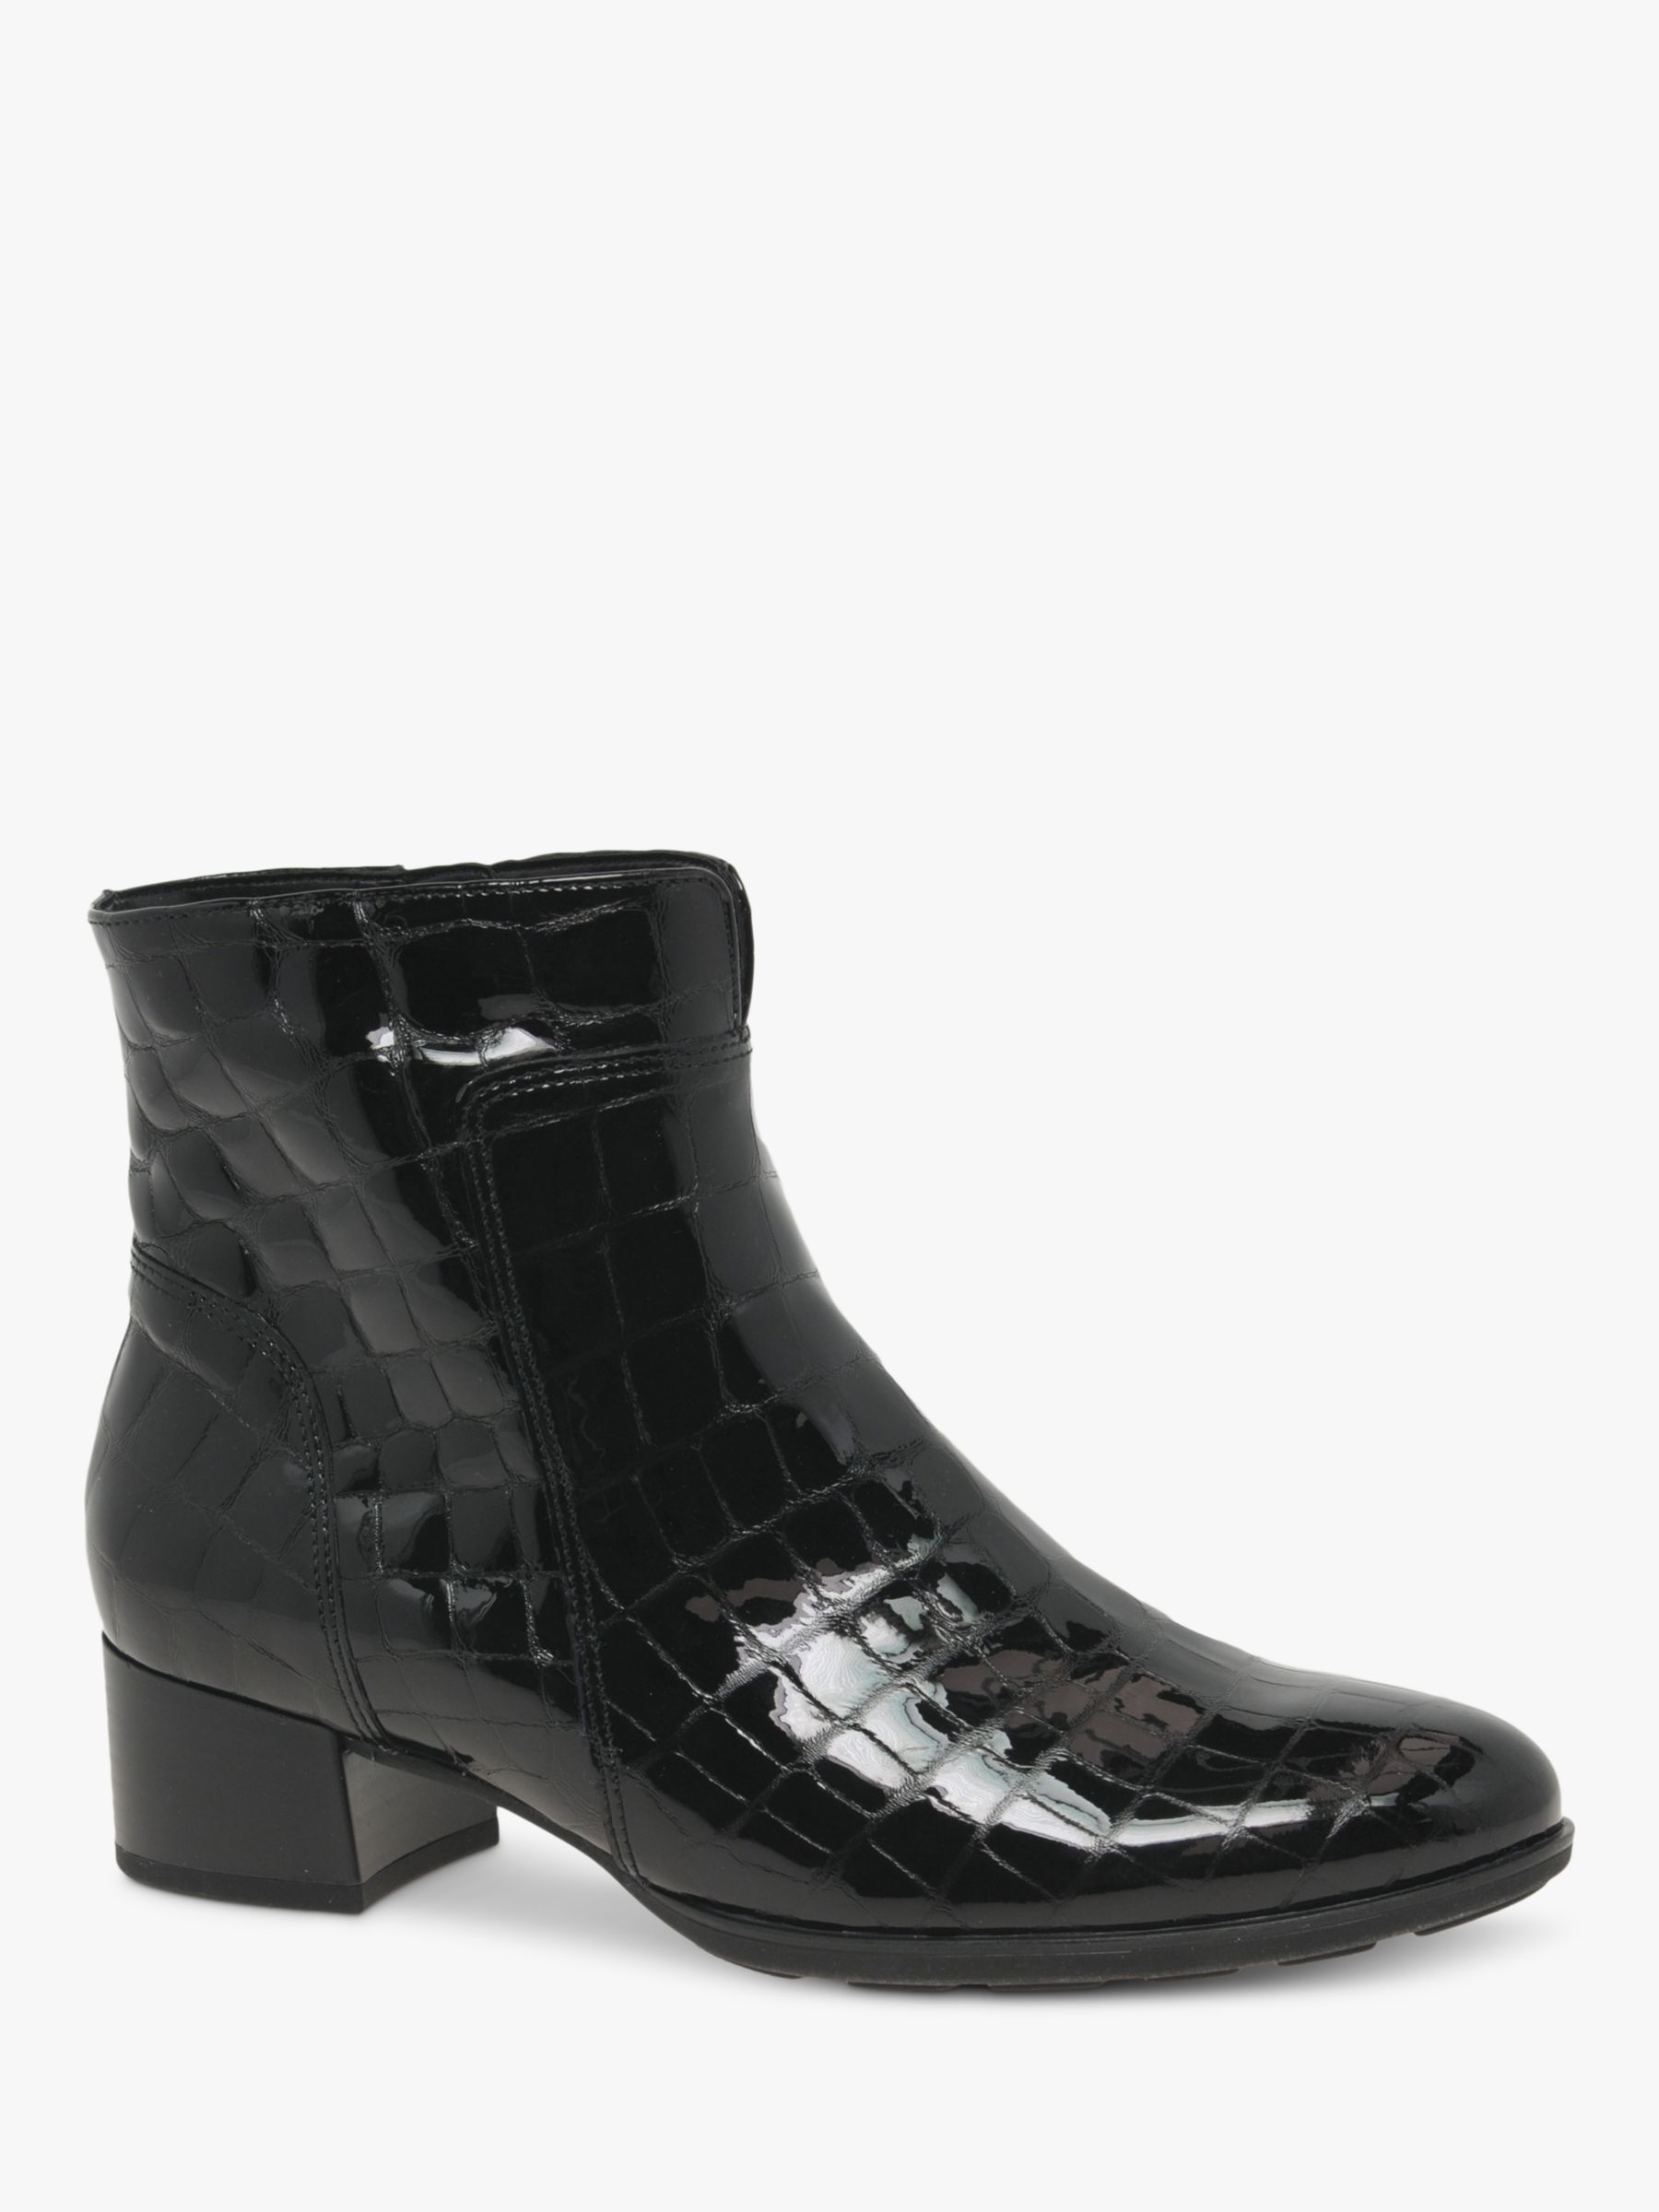 Shining foran Glatte Gabor Delphino Patent Croc Leather Ankle Boots, Black at John Lewis &  Partners